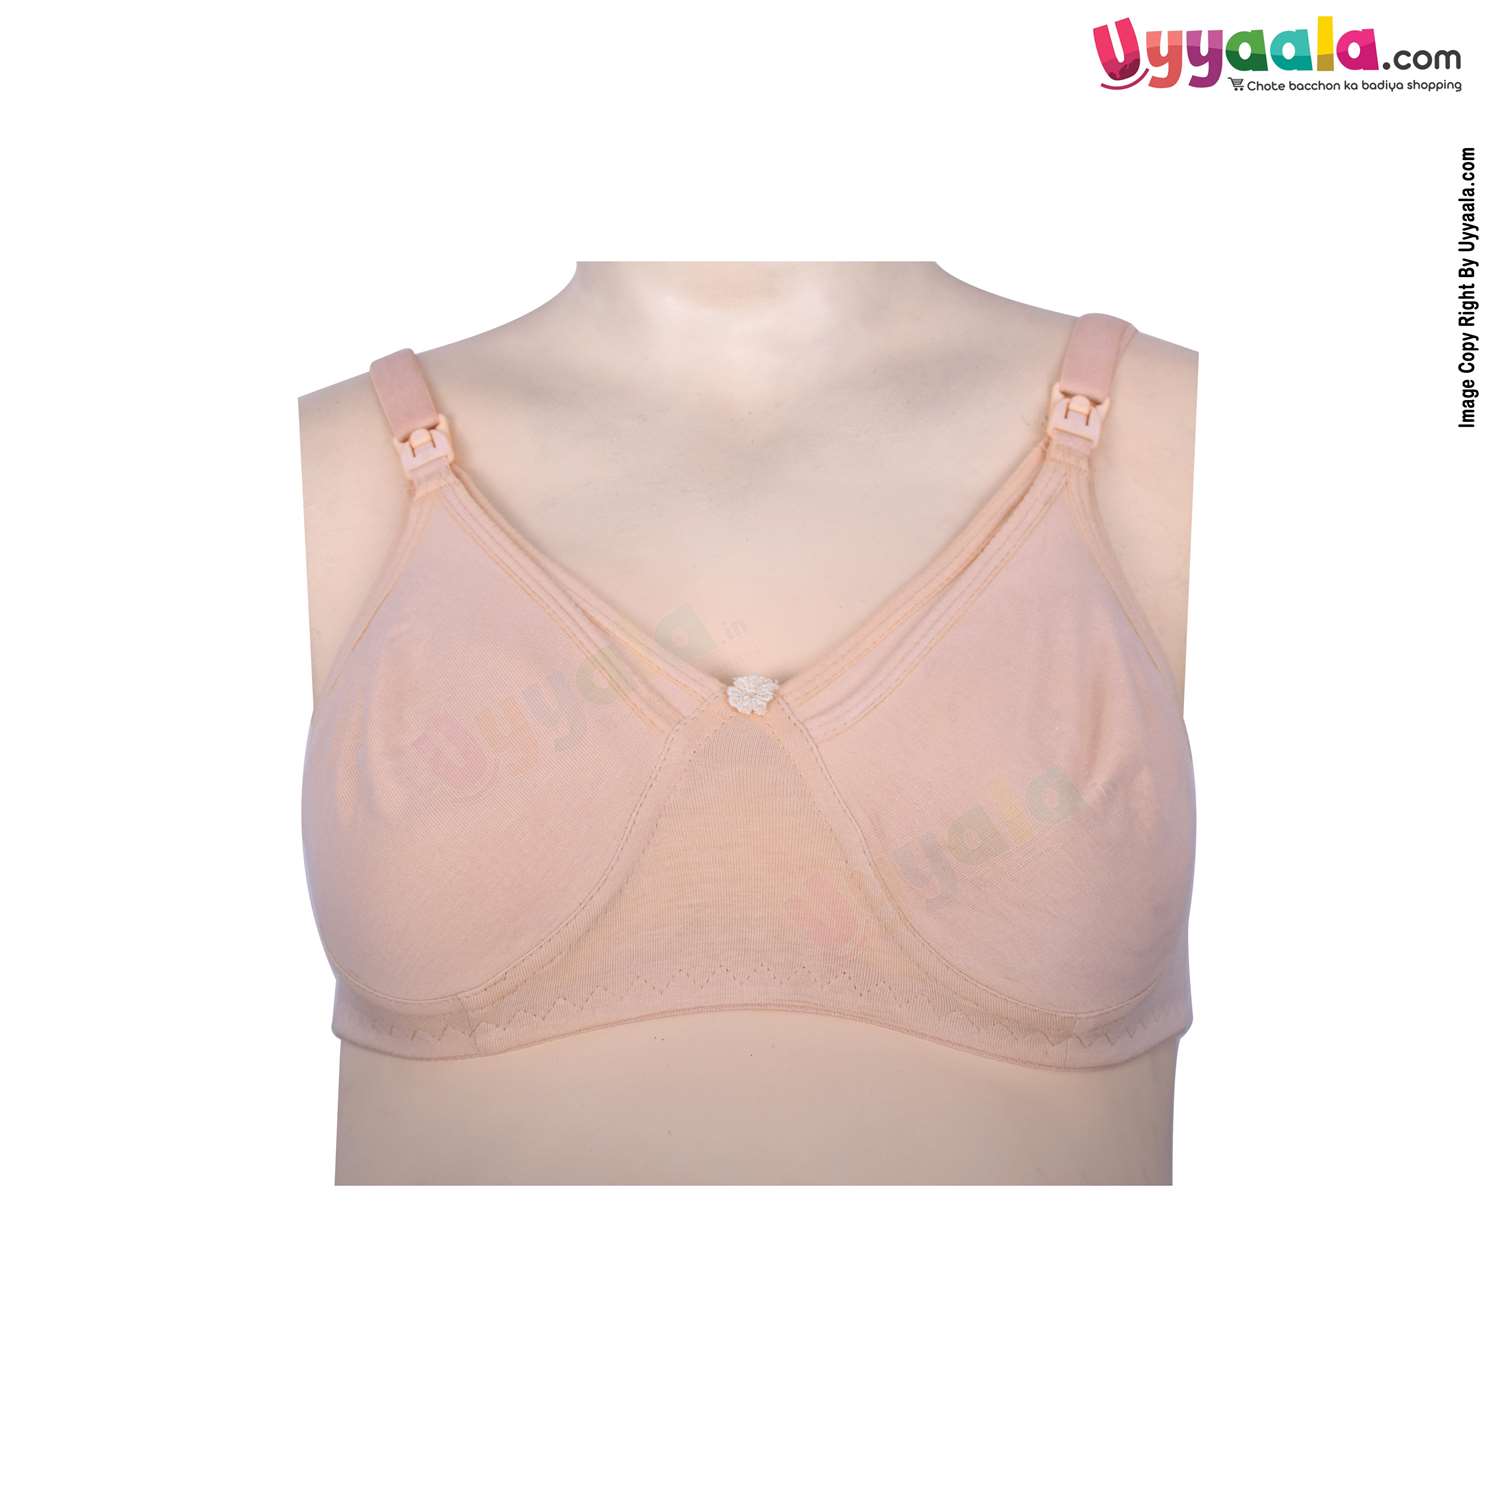 Cup Size D - Buy Cup Size D online in India